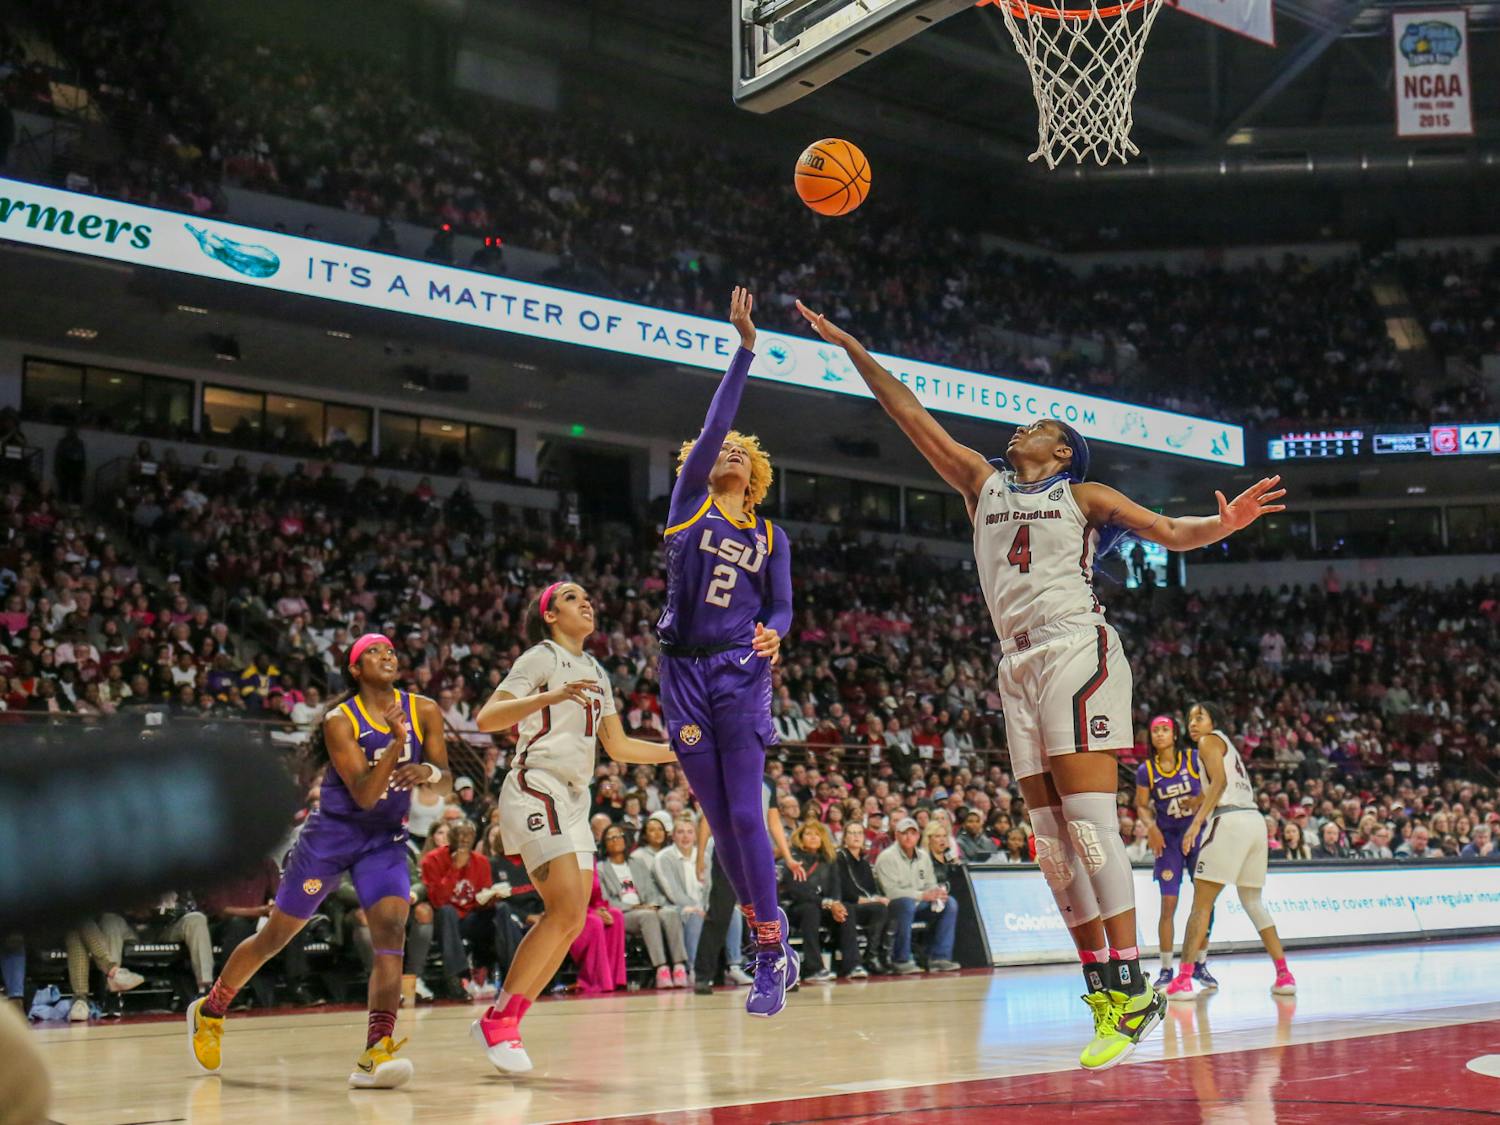 South Carolina's senior forward Aliyah Boston attempts to block a layup by LSU’s Jasmine Carson during the teams' matchup at Colonial Life Arena on Feb. 12, 2023. The Gamecocks beat the Tigers 88-64.